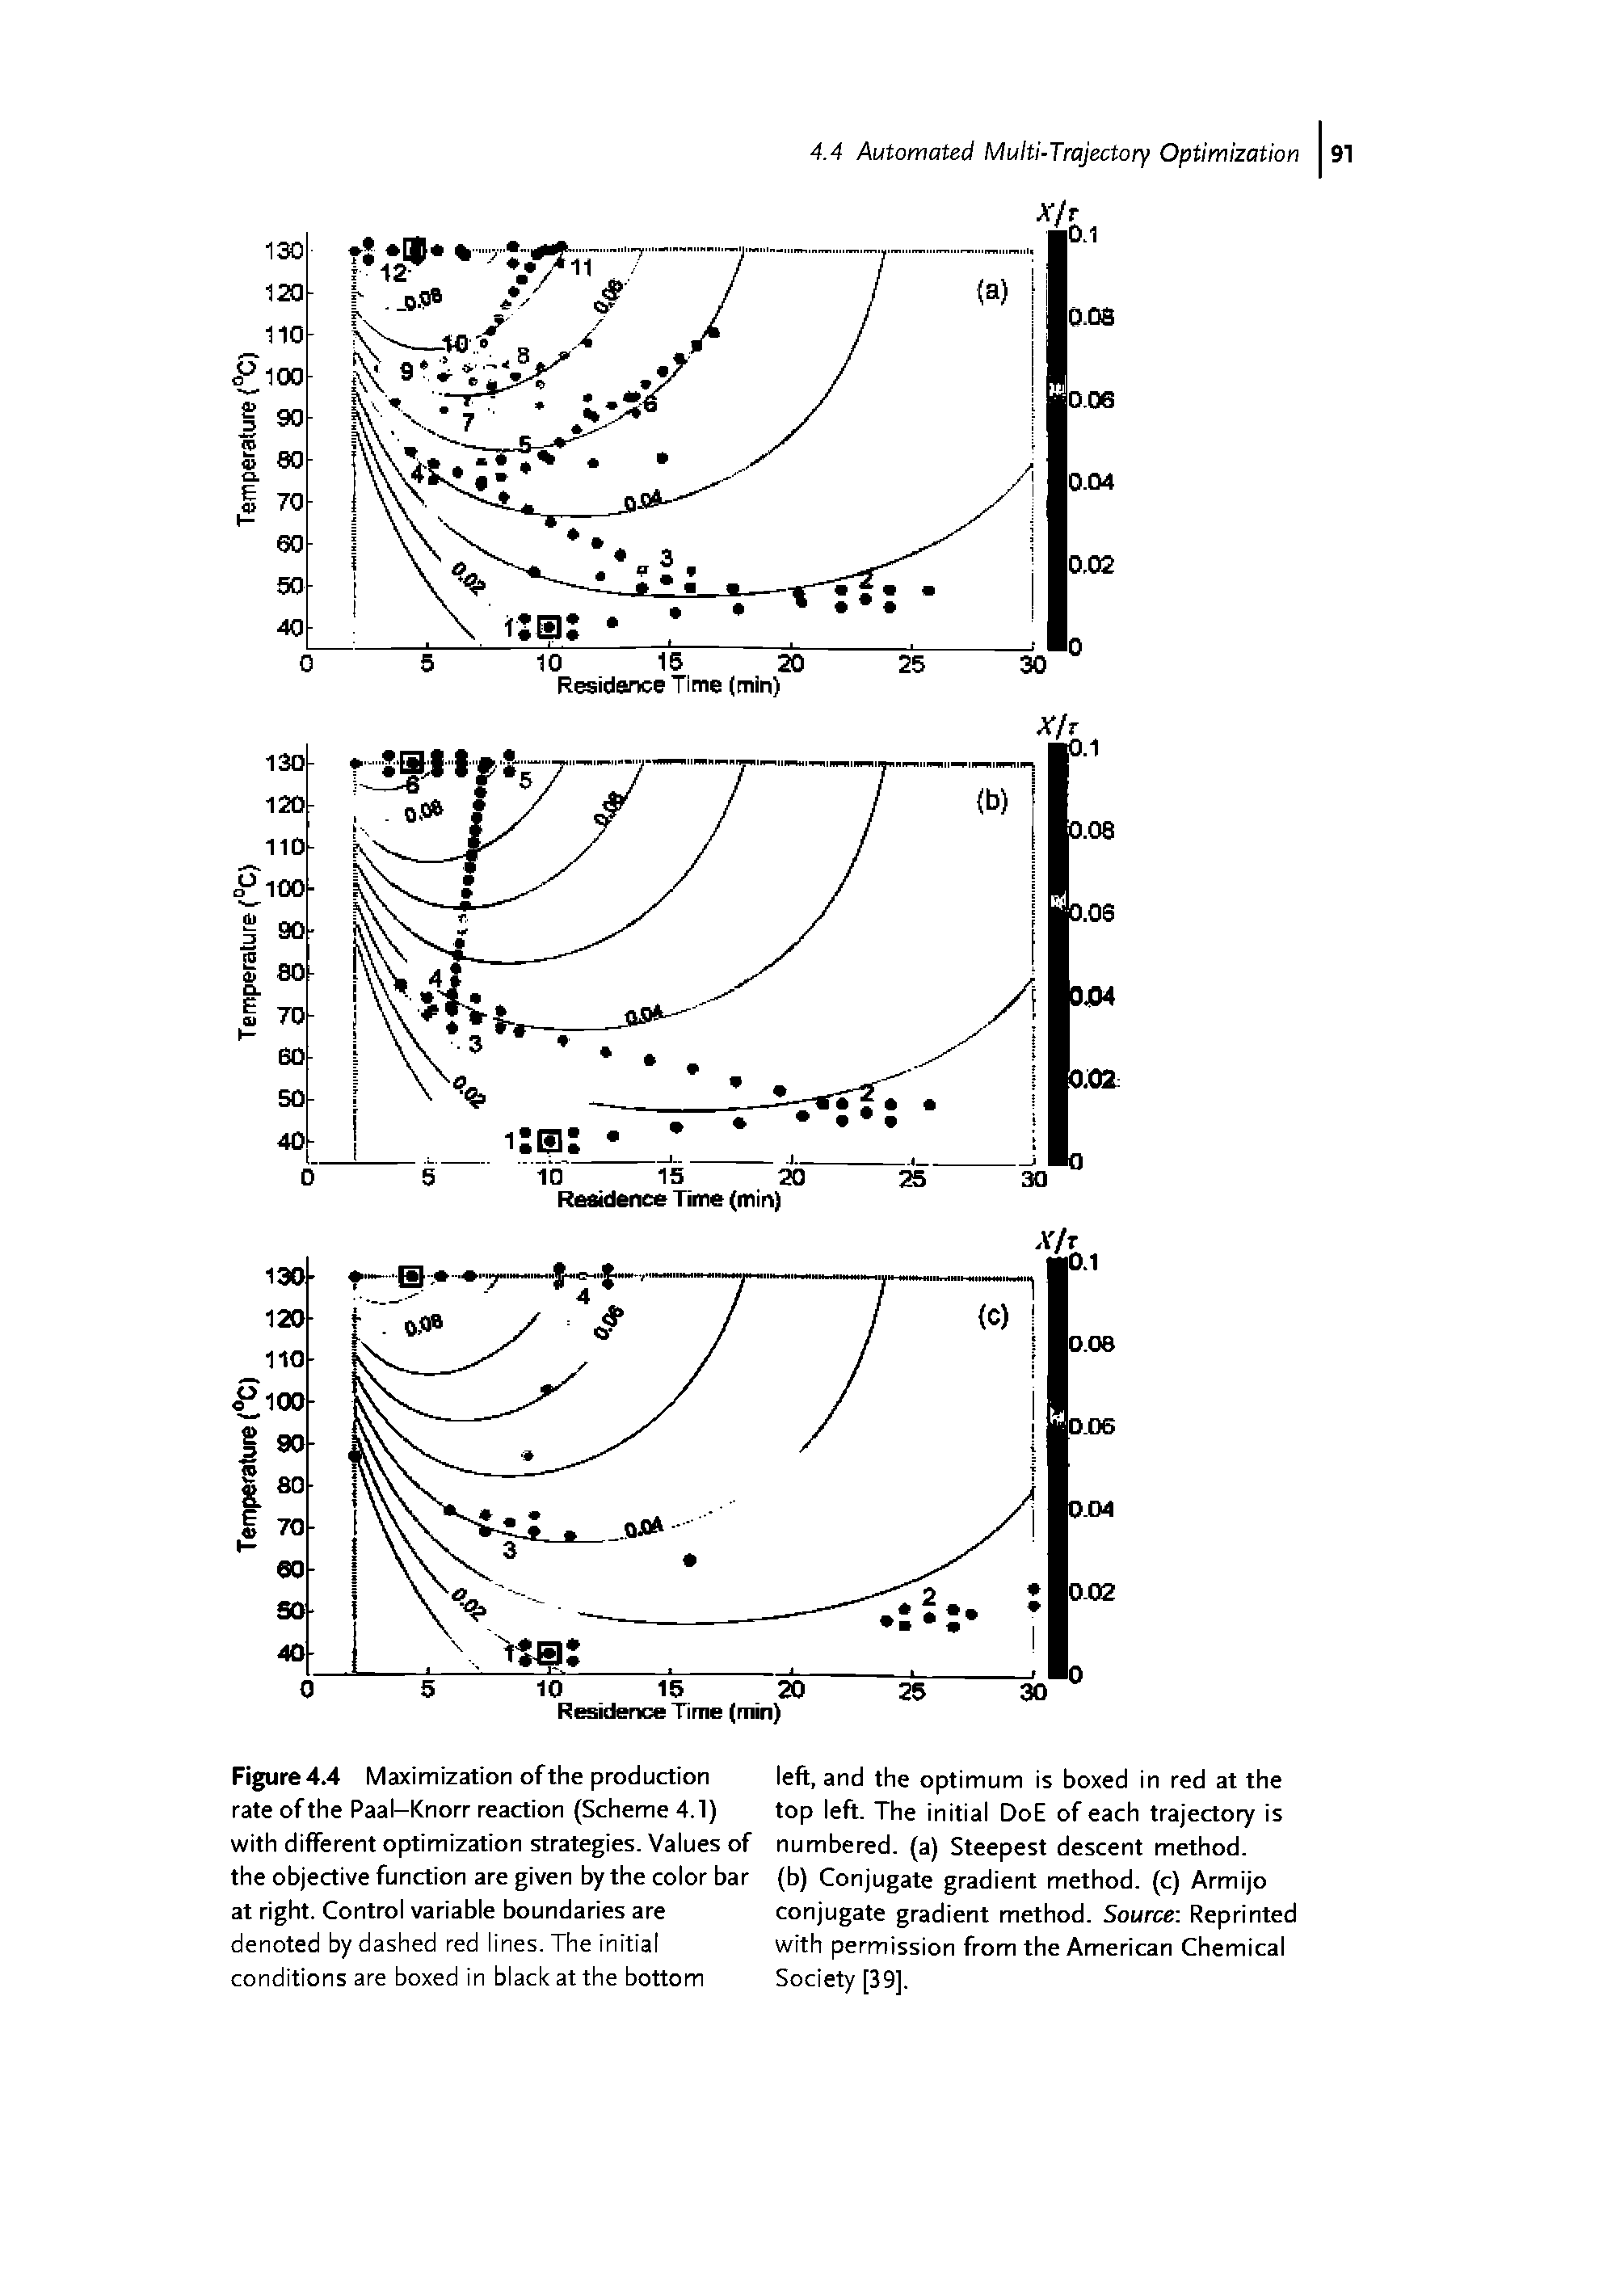 Figure 4.4 Maximization of the production rate of the Paal-Knorr reaction (Scheme 4.1) with different optimization strategies. Values of the objective function are given by the color bar at right. Control variable boundaries are denoted by dashed red lines. The initial conditions are boxed in black at the bottom...